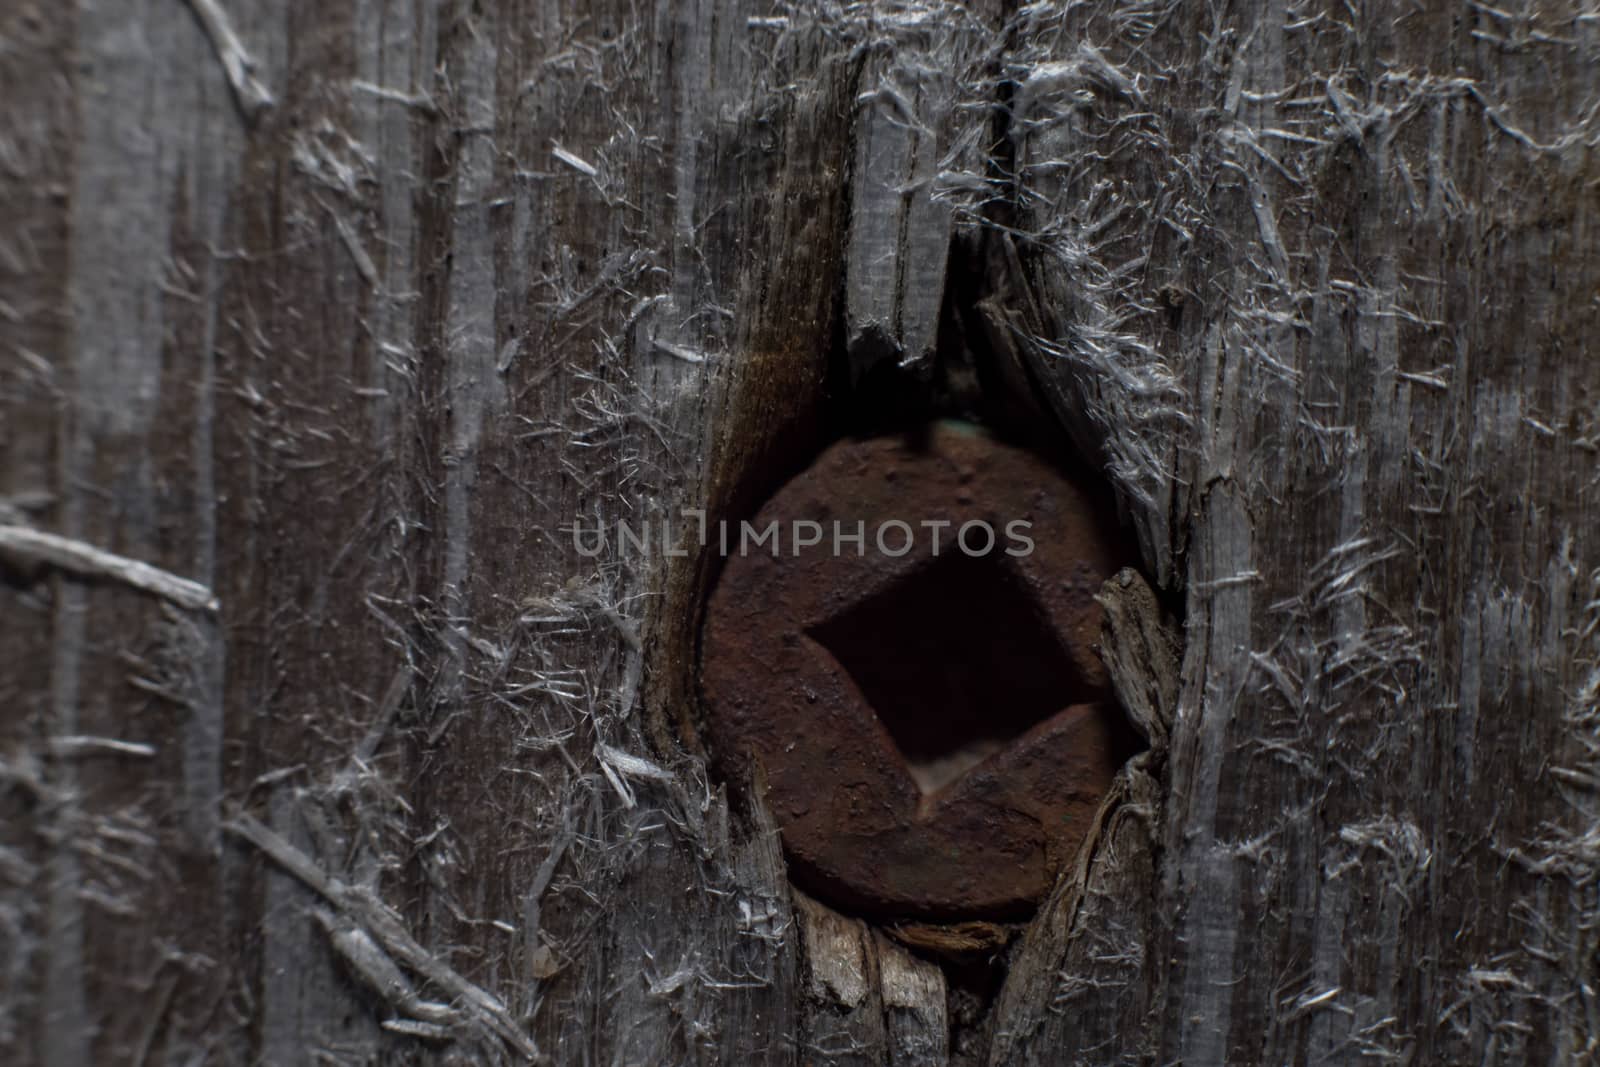 A close-up of a rusty screw with a square recess that has been pushed deep into aged wood causing splinters.